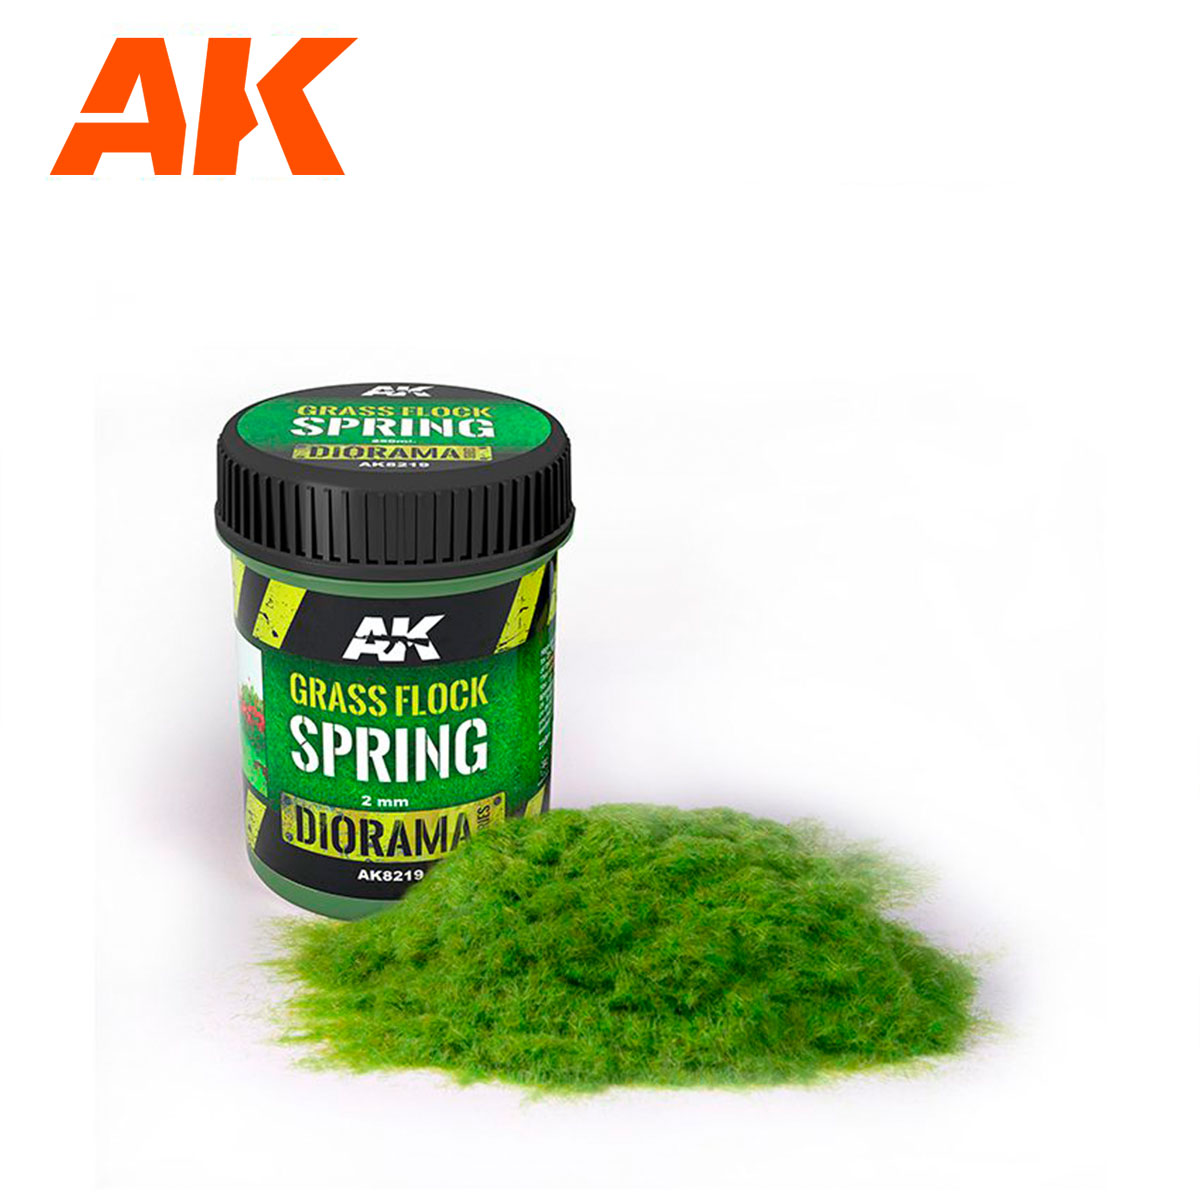 Buy GRASS FLOCK 2MM SPRING online for5,95€ | AK-Interactive